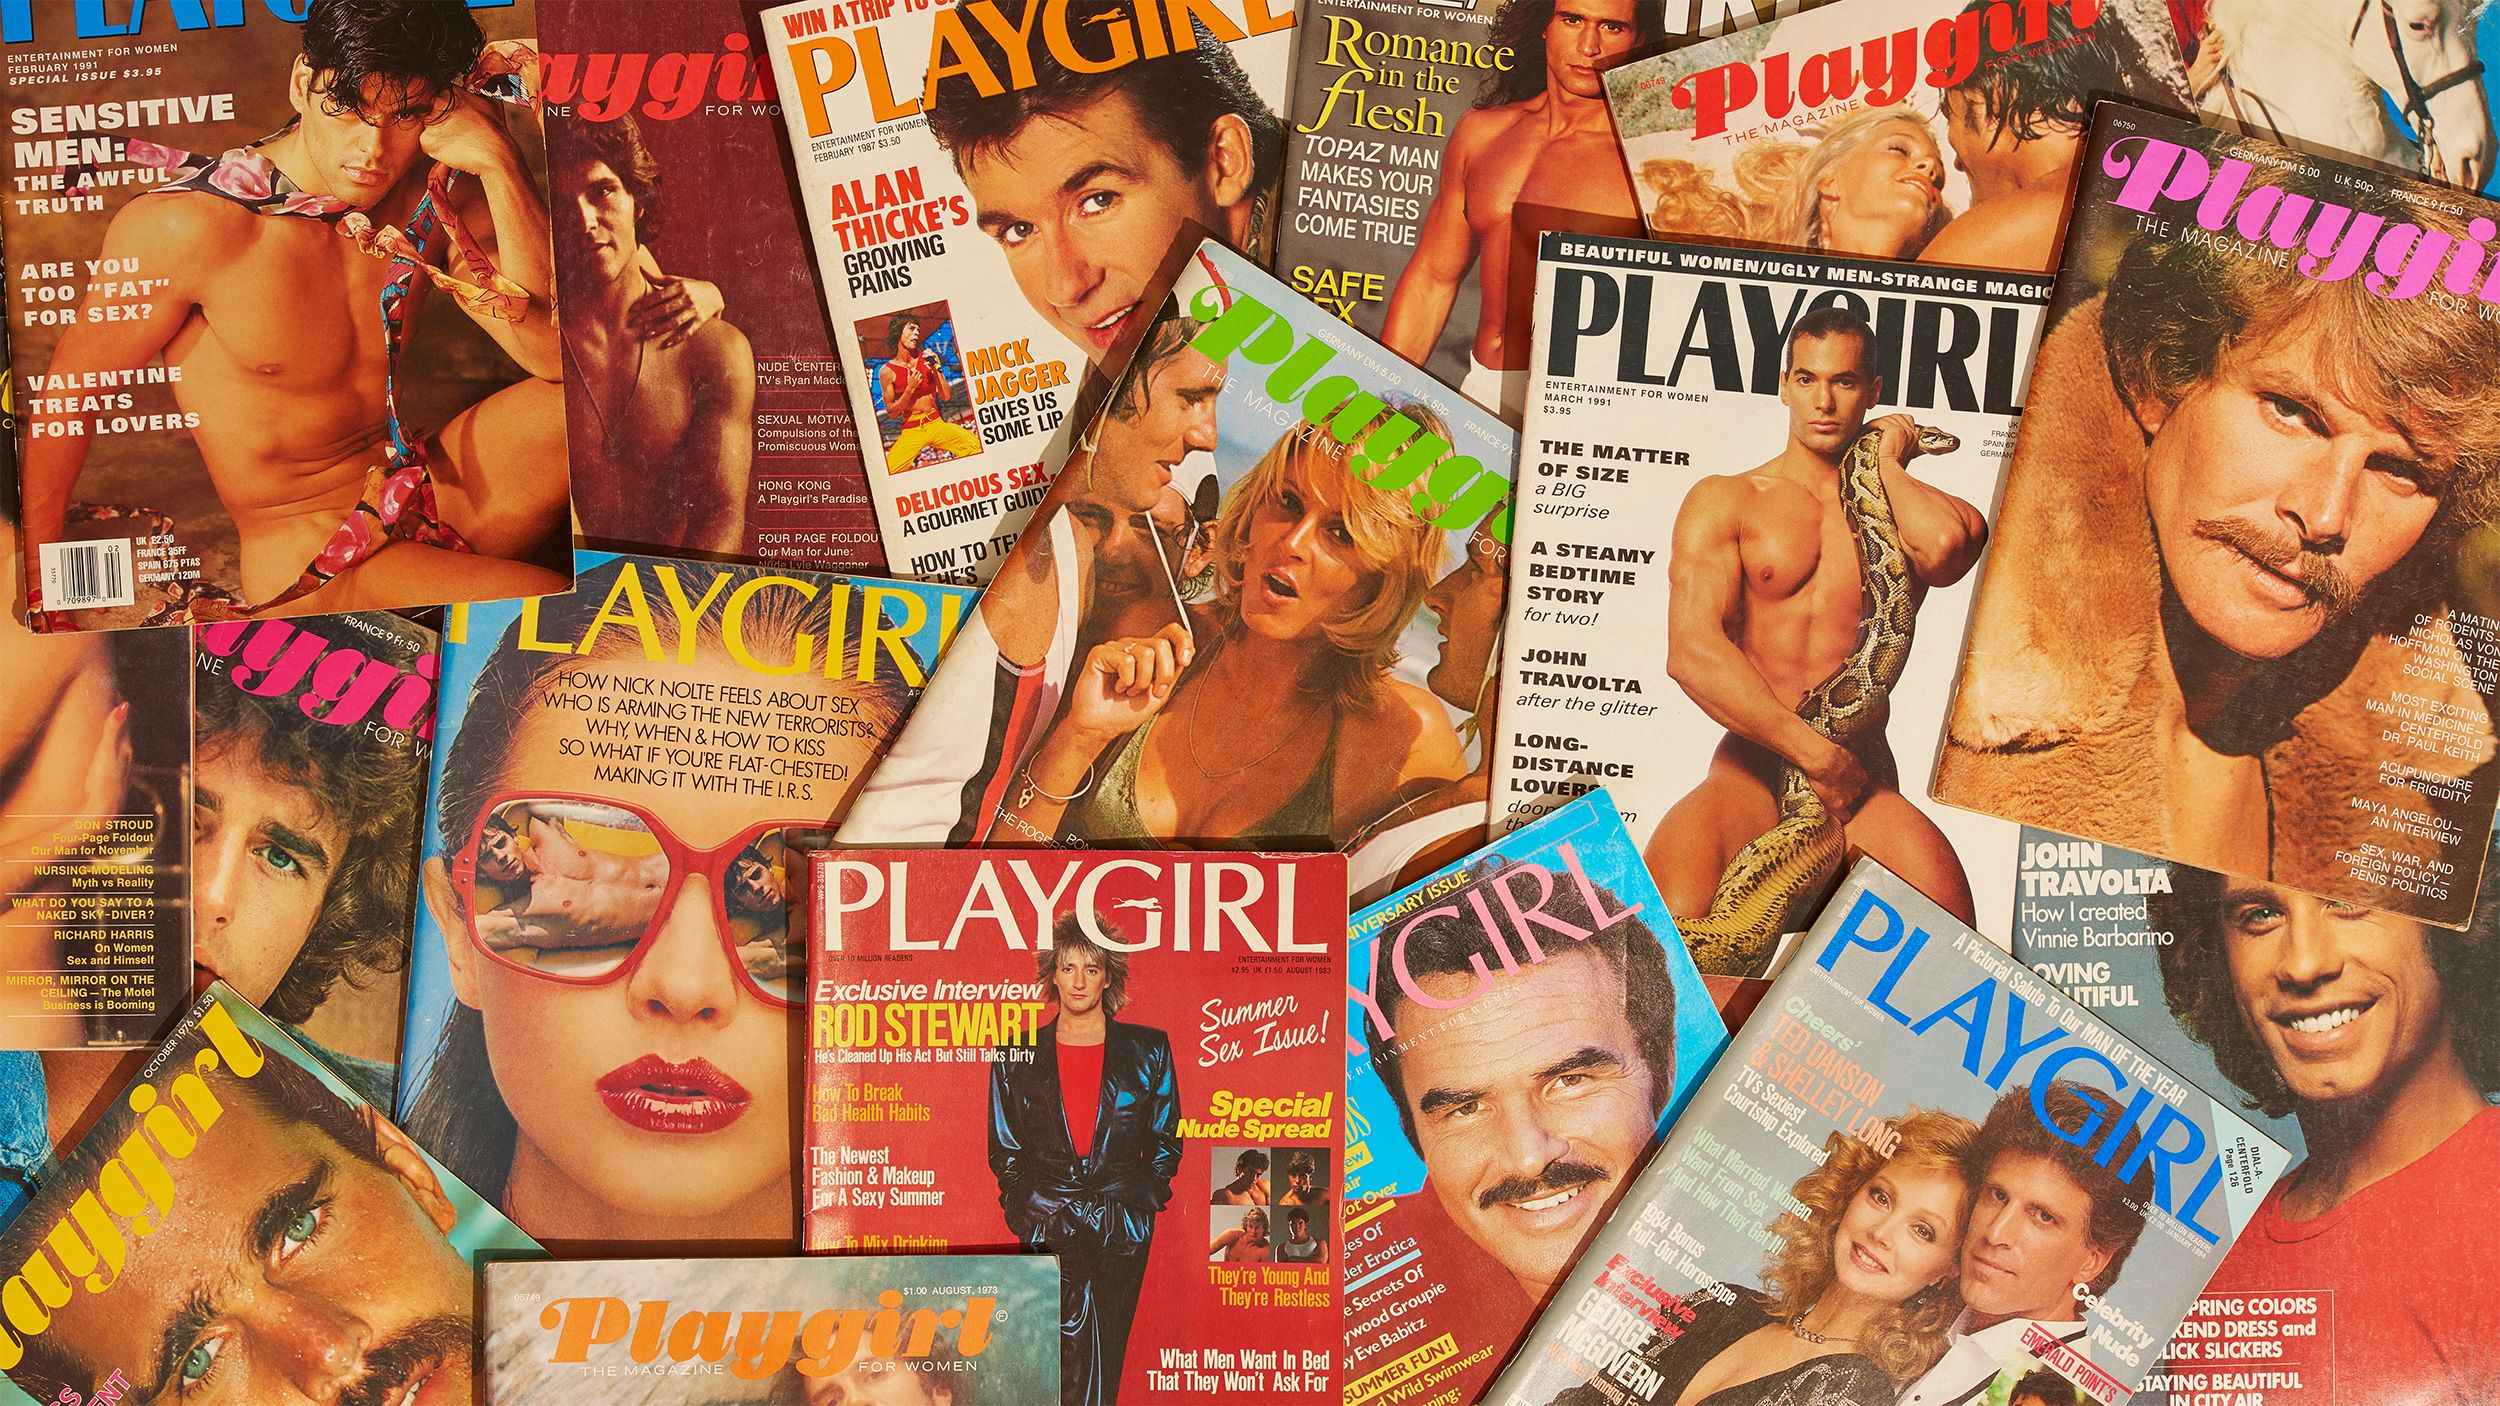 Encyclopedia People Naked At The Beach - History of Playgirl Magazine - How Playgirl Normalized Male Nudity